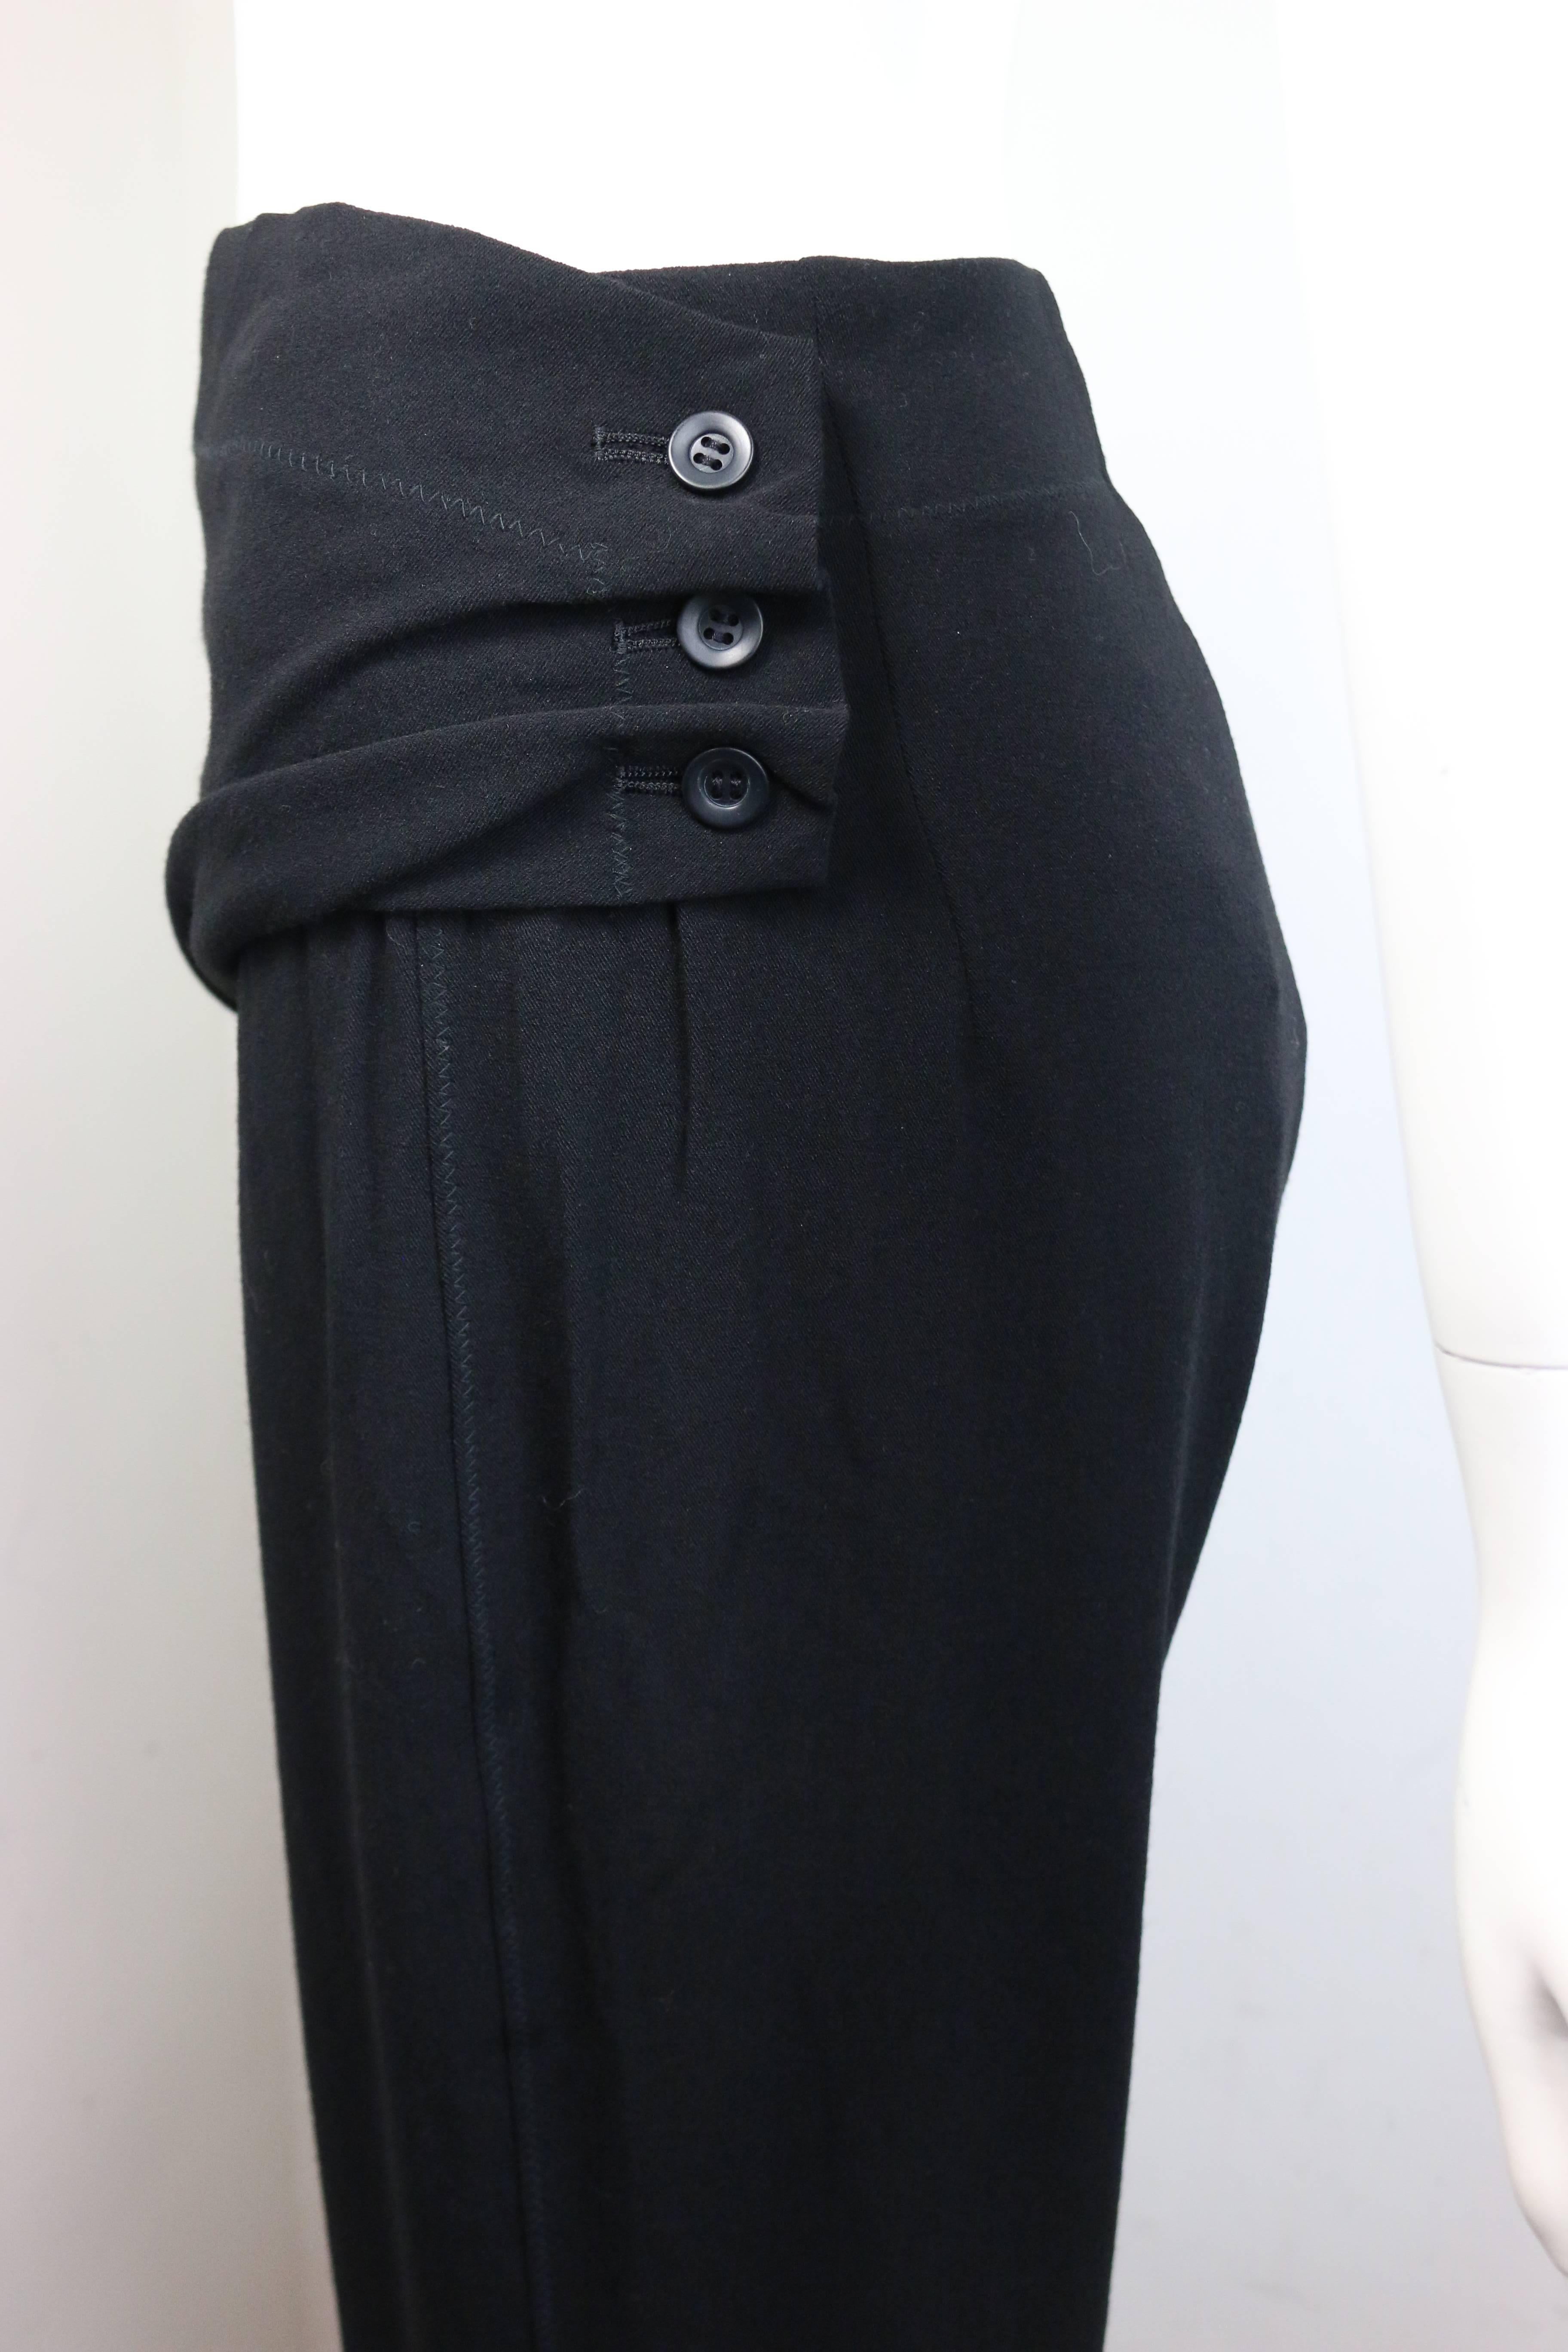 - Vintage 90s Issey Miyake black wool straight legs and wide on the bottom pants. Featuring a three buttons wrap design in front. A sew stitches detail on the right of back the knee area. It is a subtle black pants with details. A collectible item.